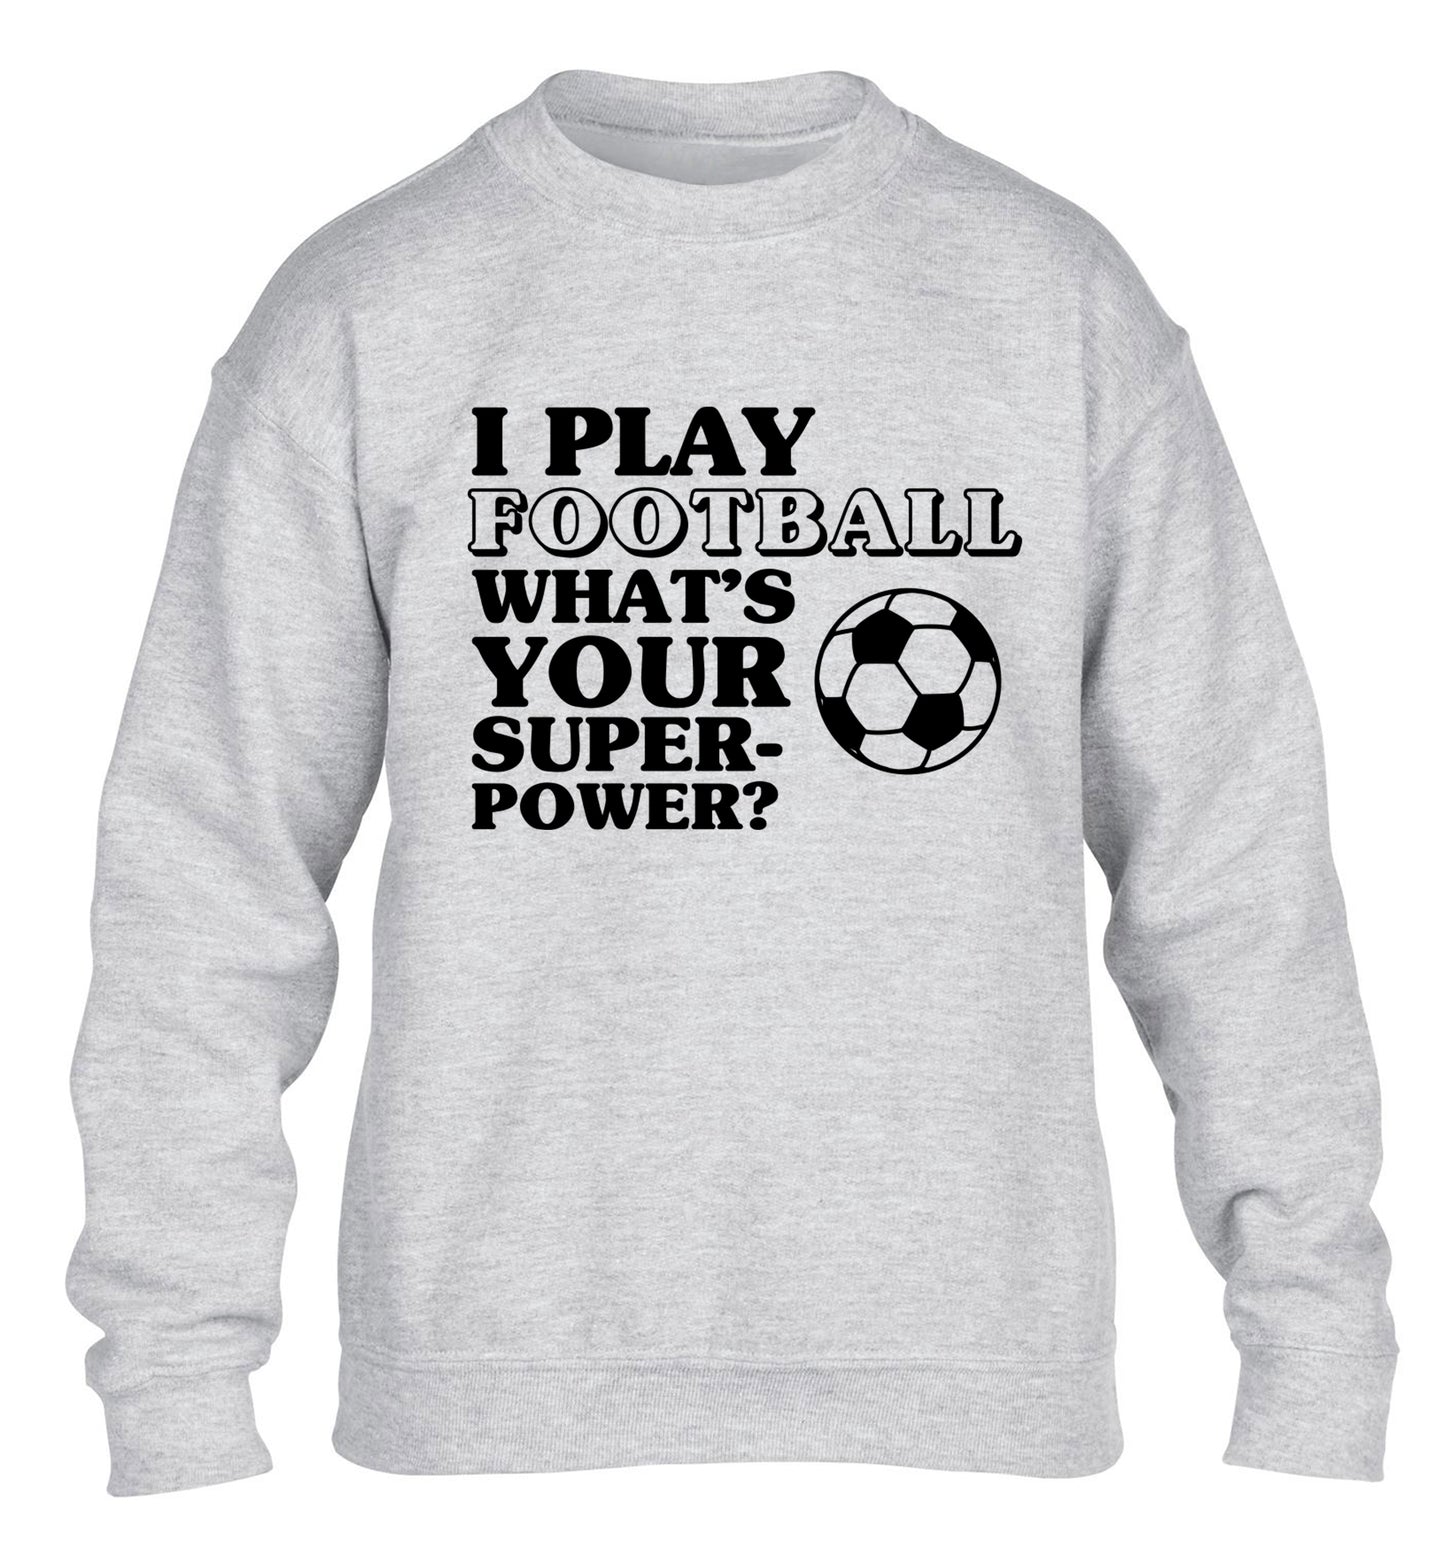 I play football what's your superpower? children's grey sweater 12-14 Years